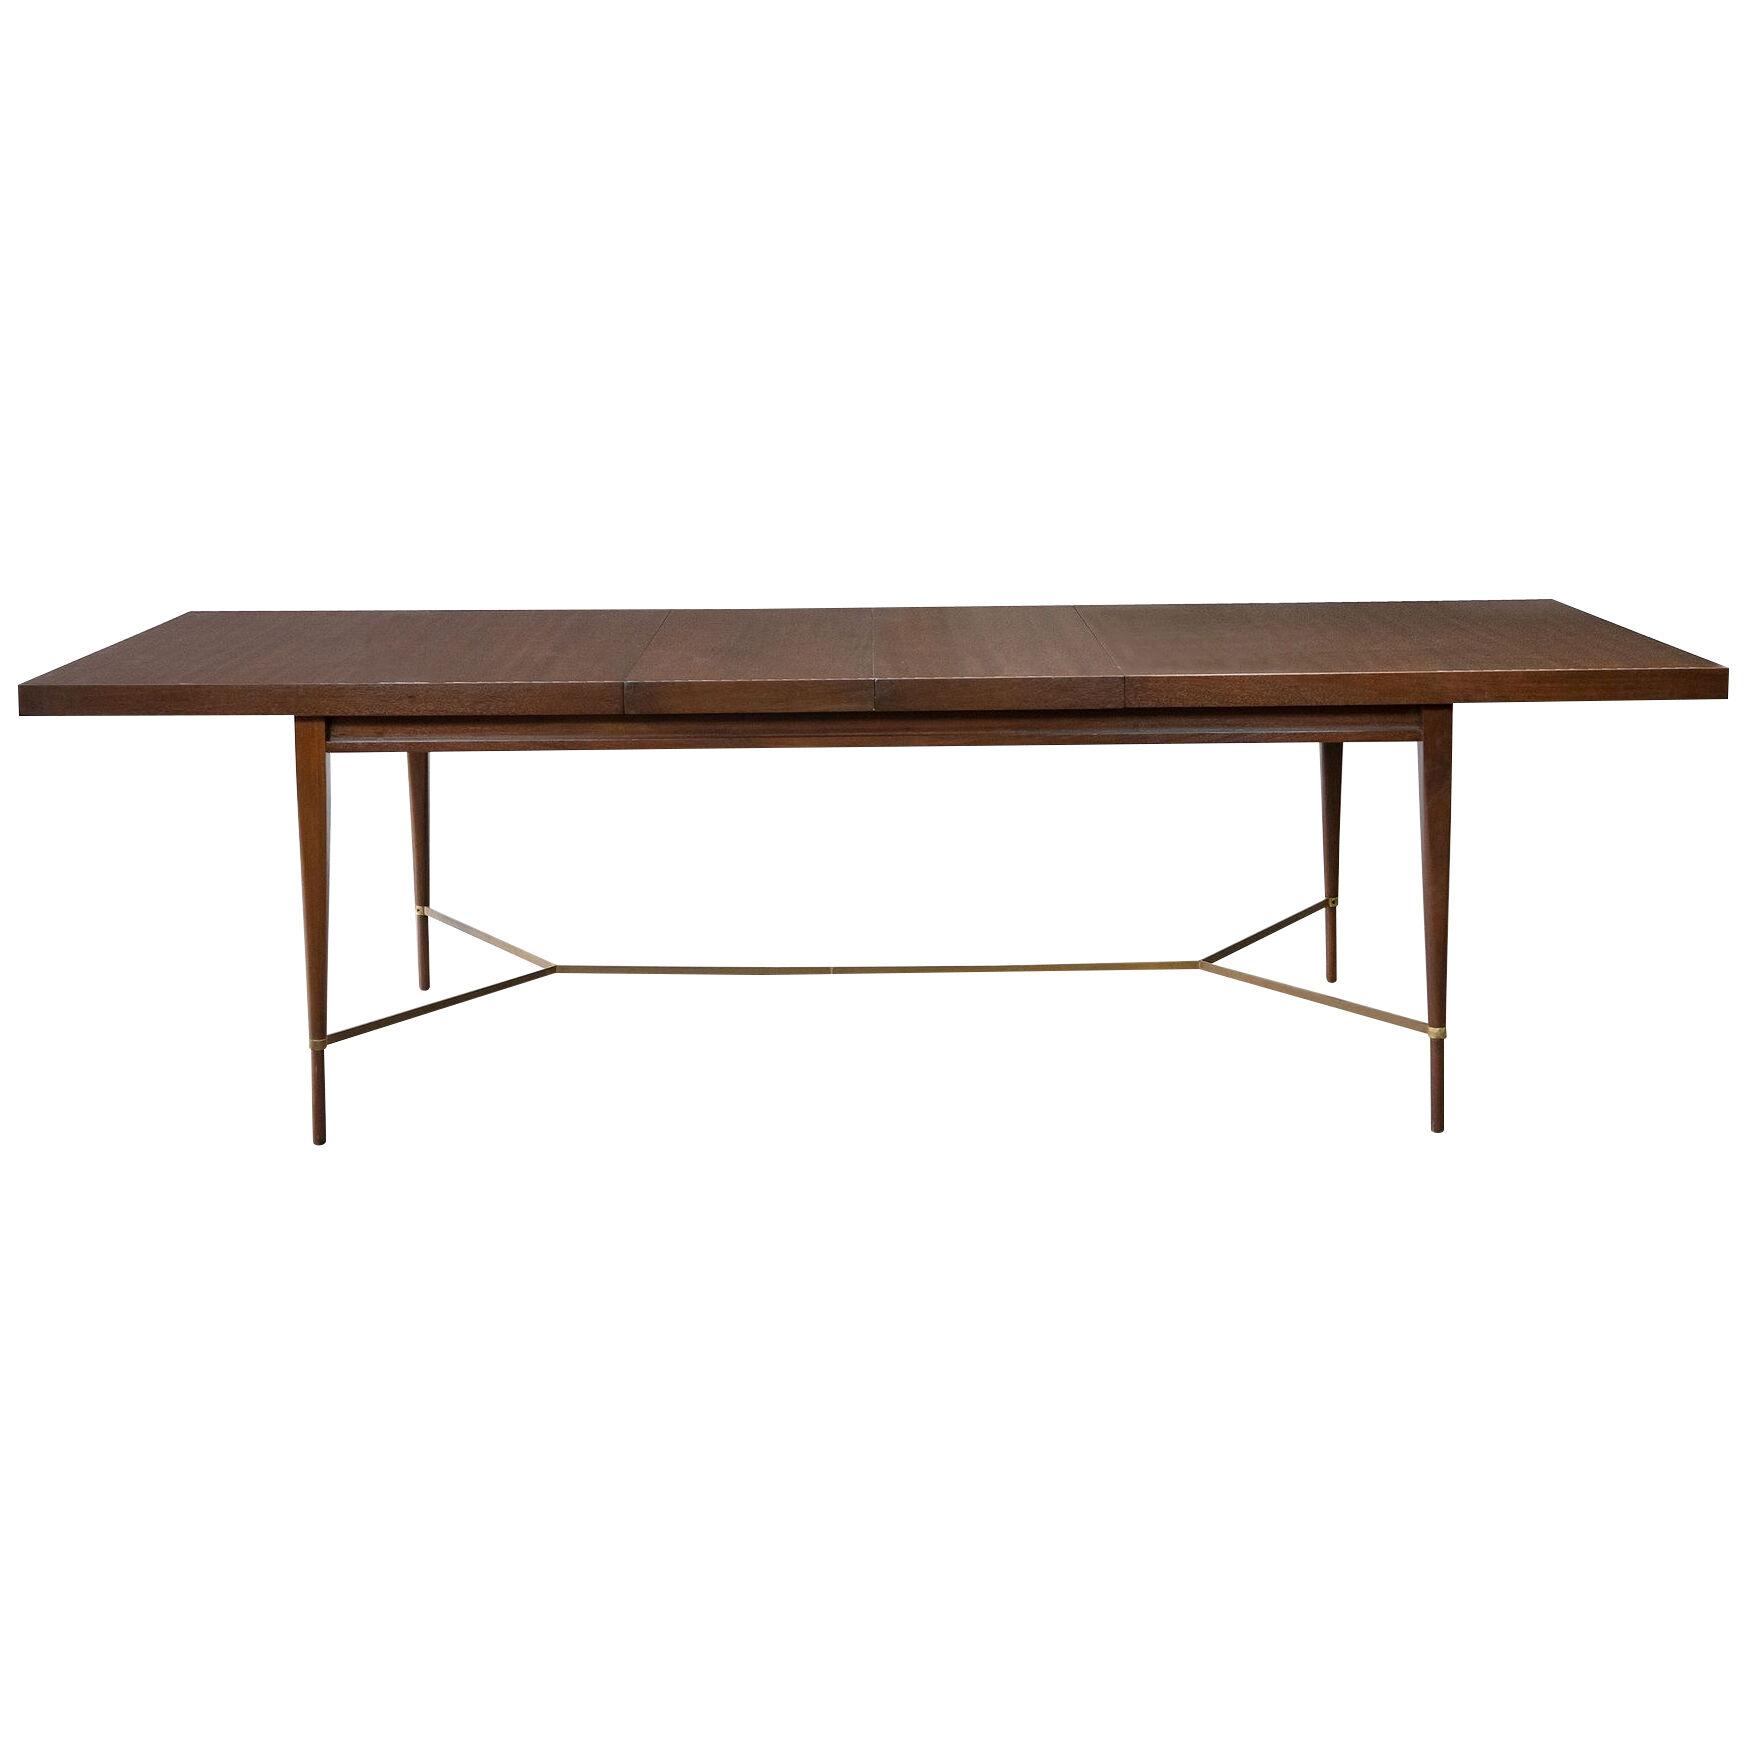 Paul McCobb Irwin Collection Mahogany Dining Table for Calvin 1950s